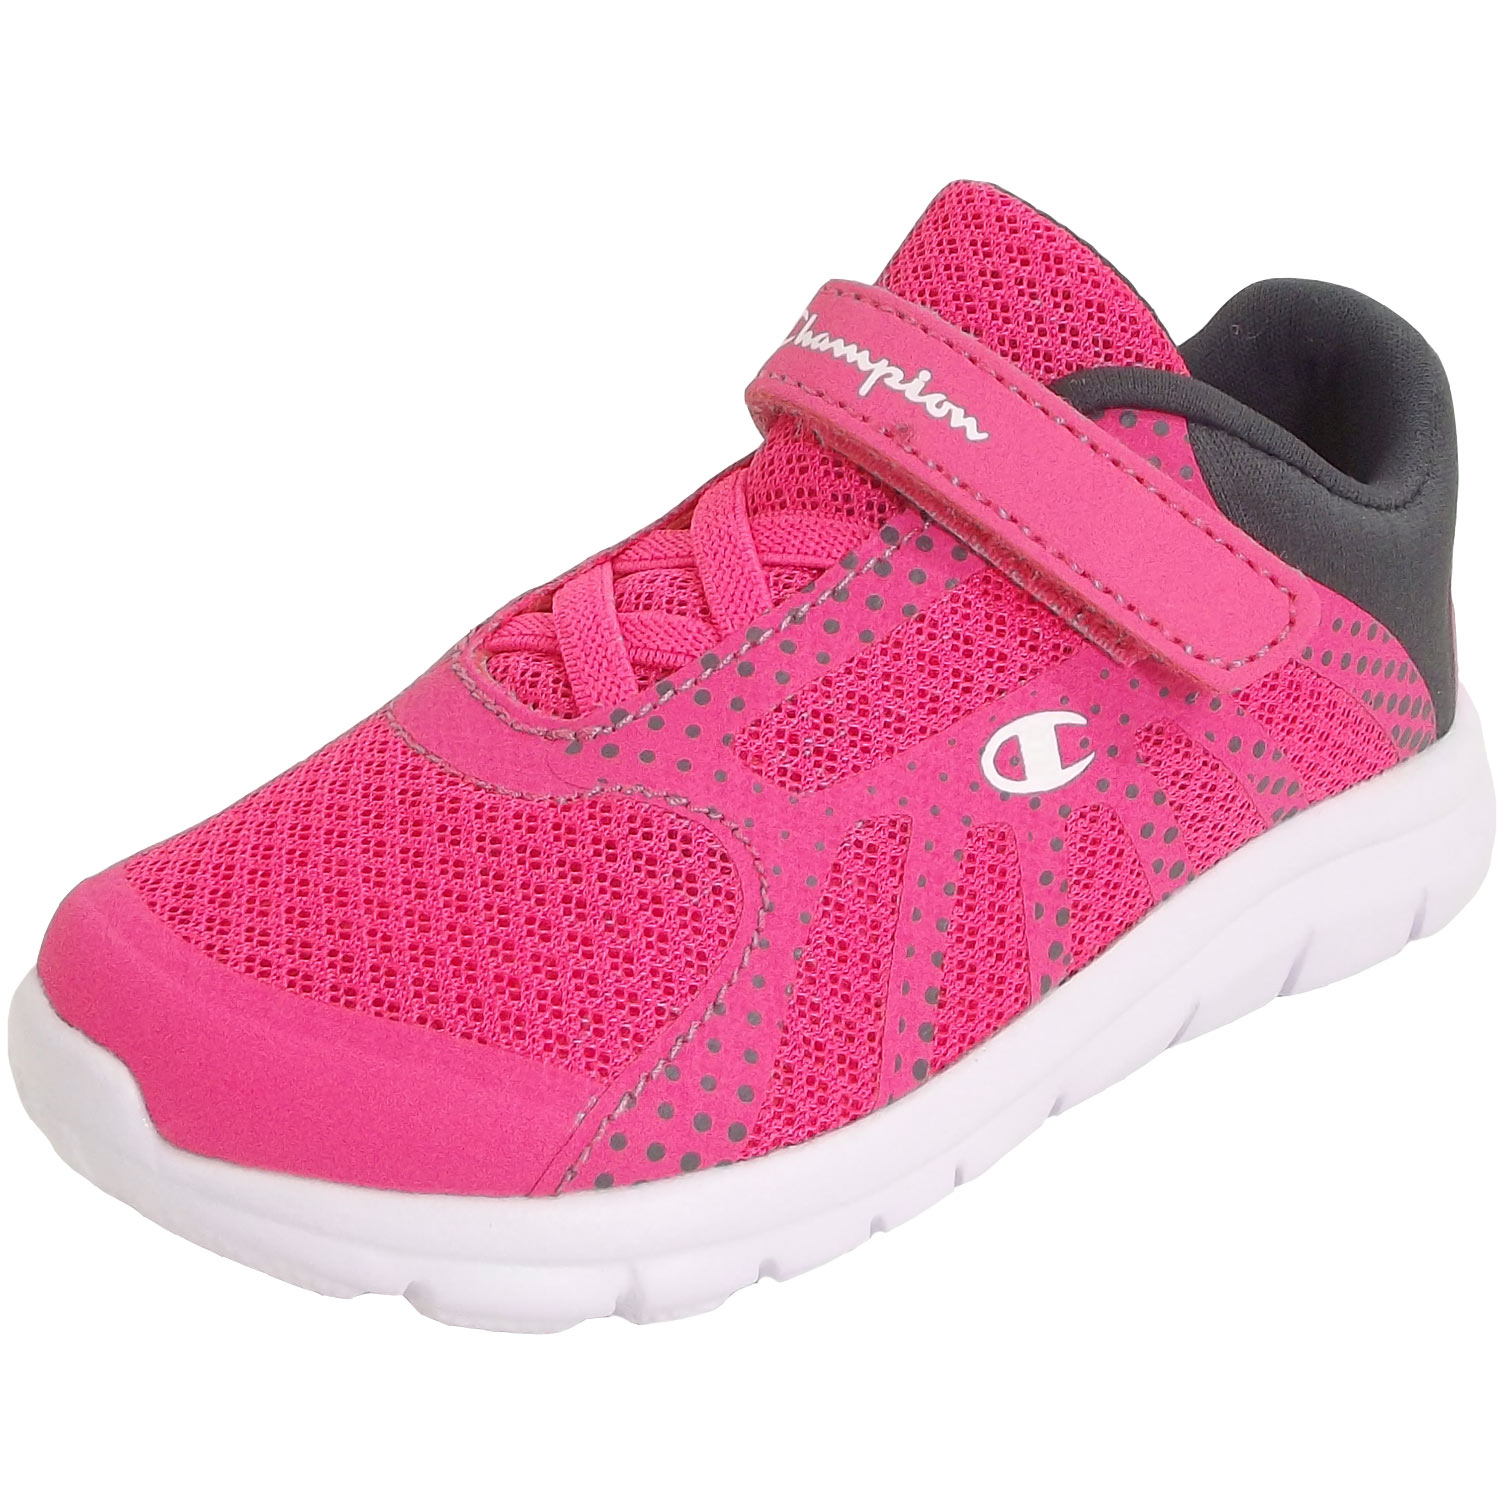 champion pink shoes